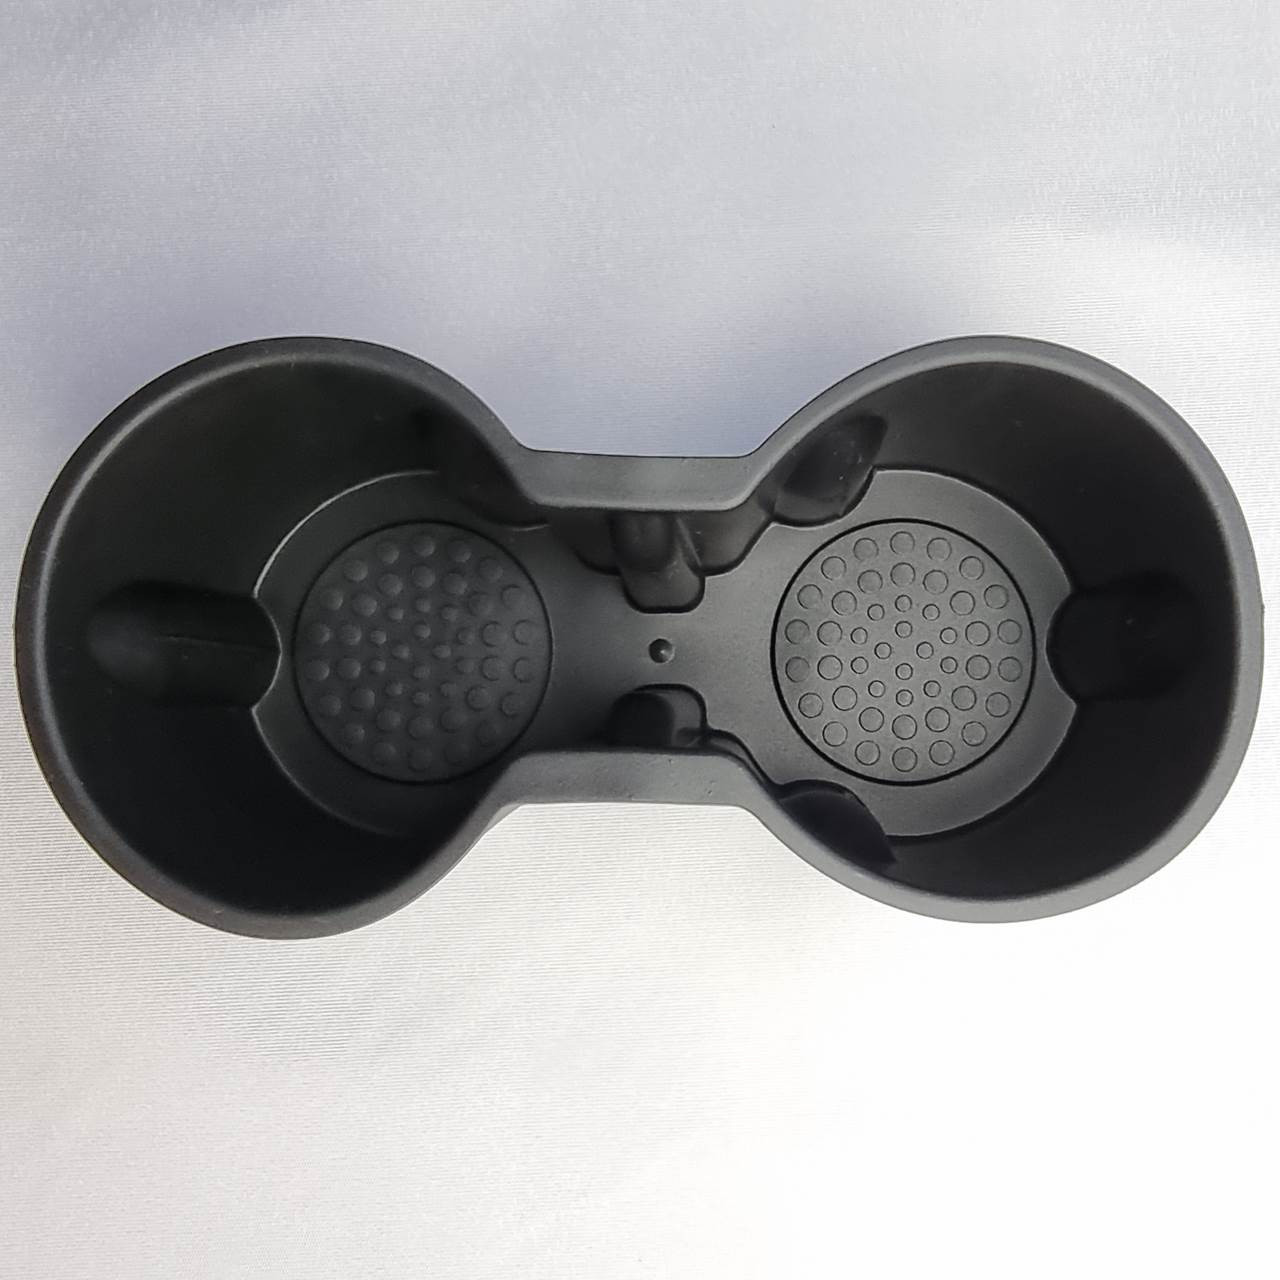 https://cdn11.bigcommerce.com/s-l424ahiuhd/images/stencil/1280x1280/products/149/635/Silicone_cup_holder_insert_for_Tesla_Model_3_and_Y__20999.1701215043.jpg?c=1